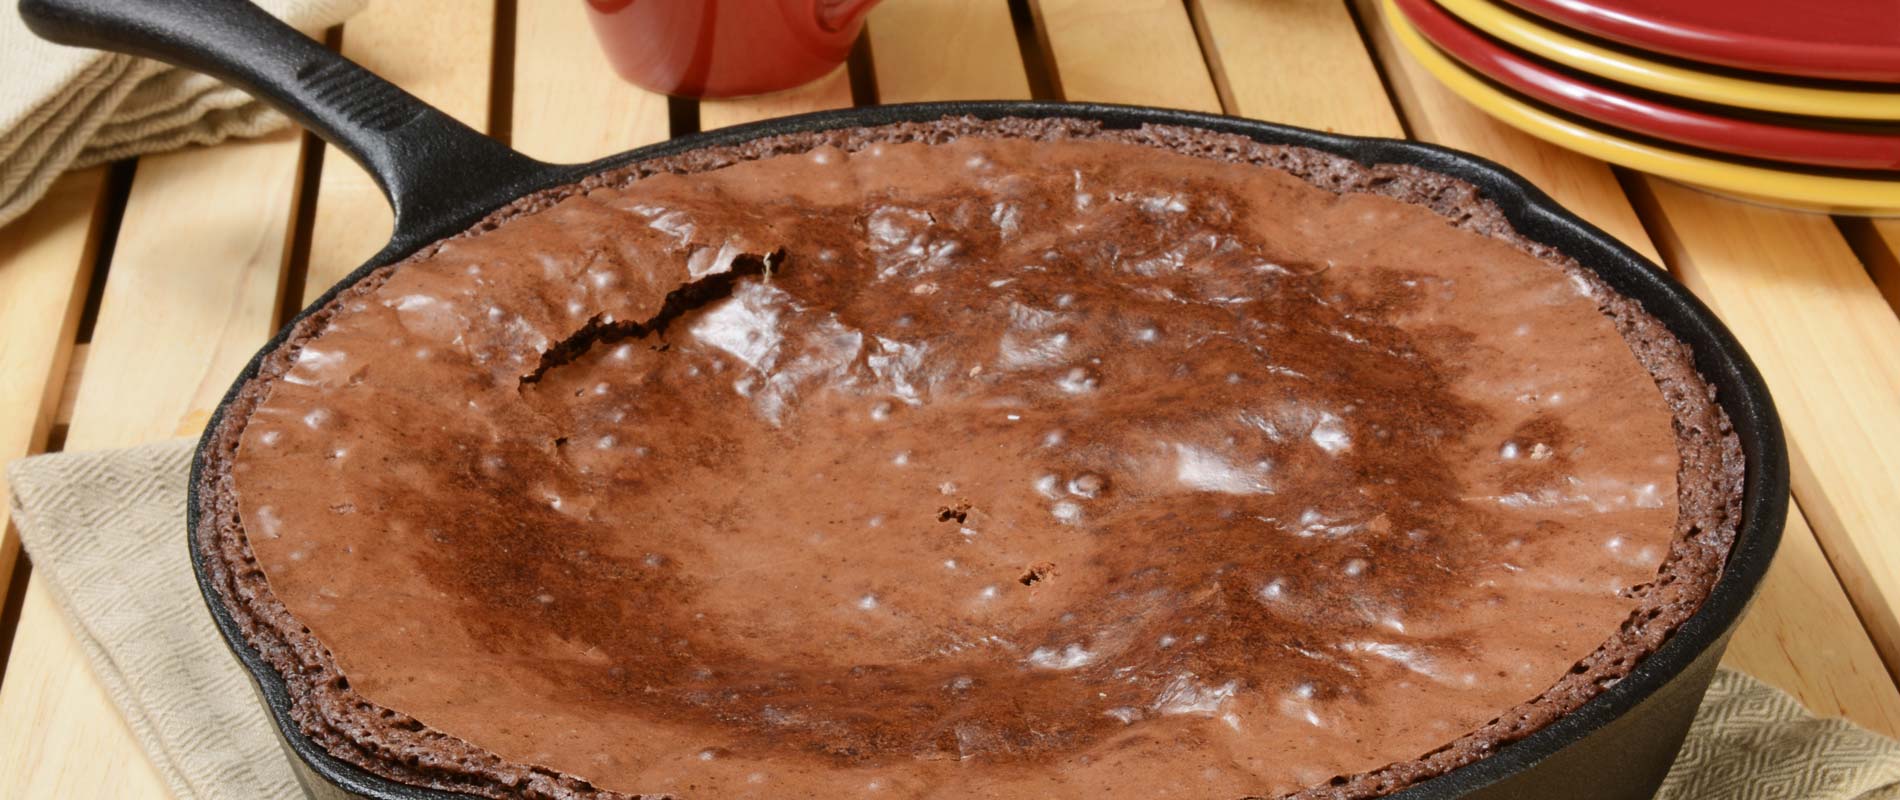 Chocolate brownie cooked in an iron skillet on a wooden dining table